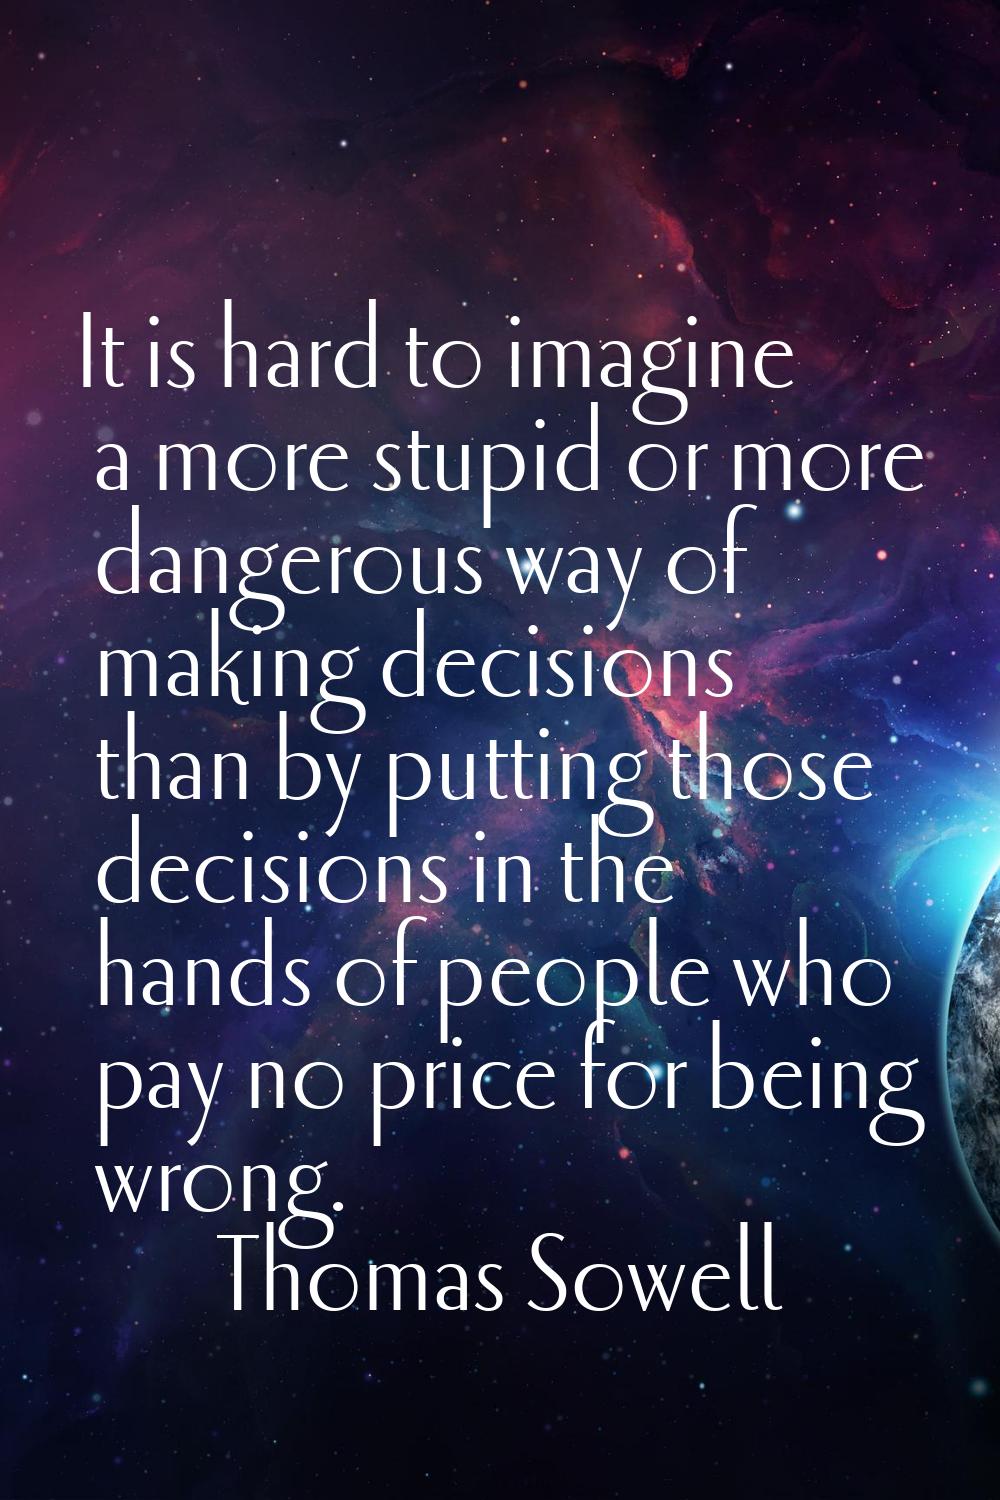 It is hard to imagine a more stupid or more dangerous way of making decisions than by putting those